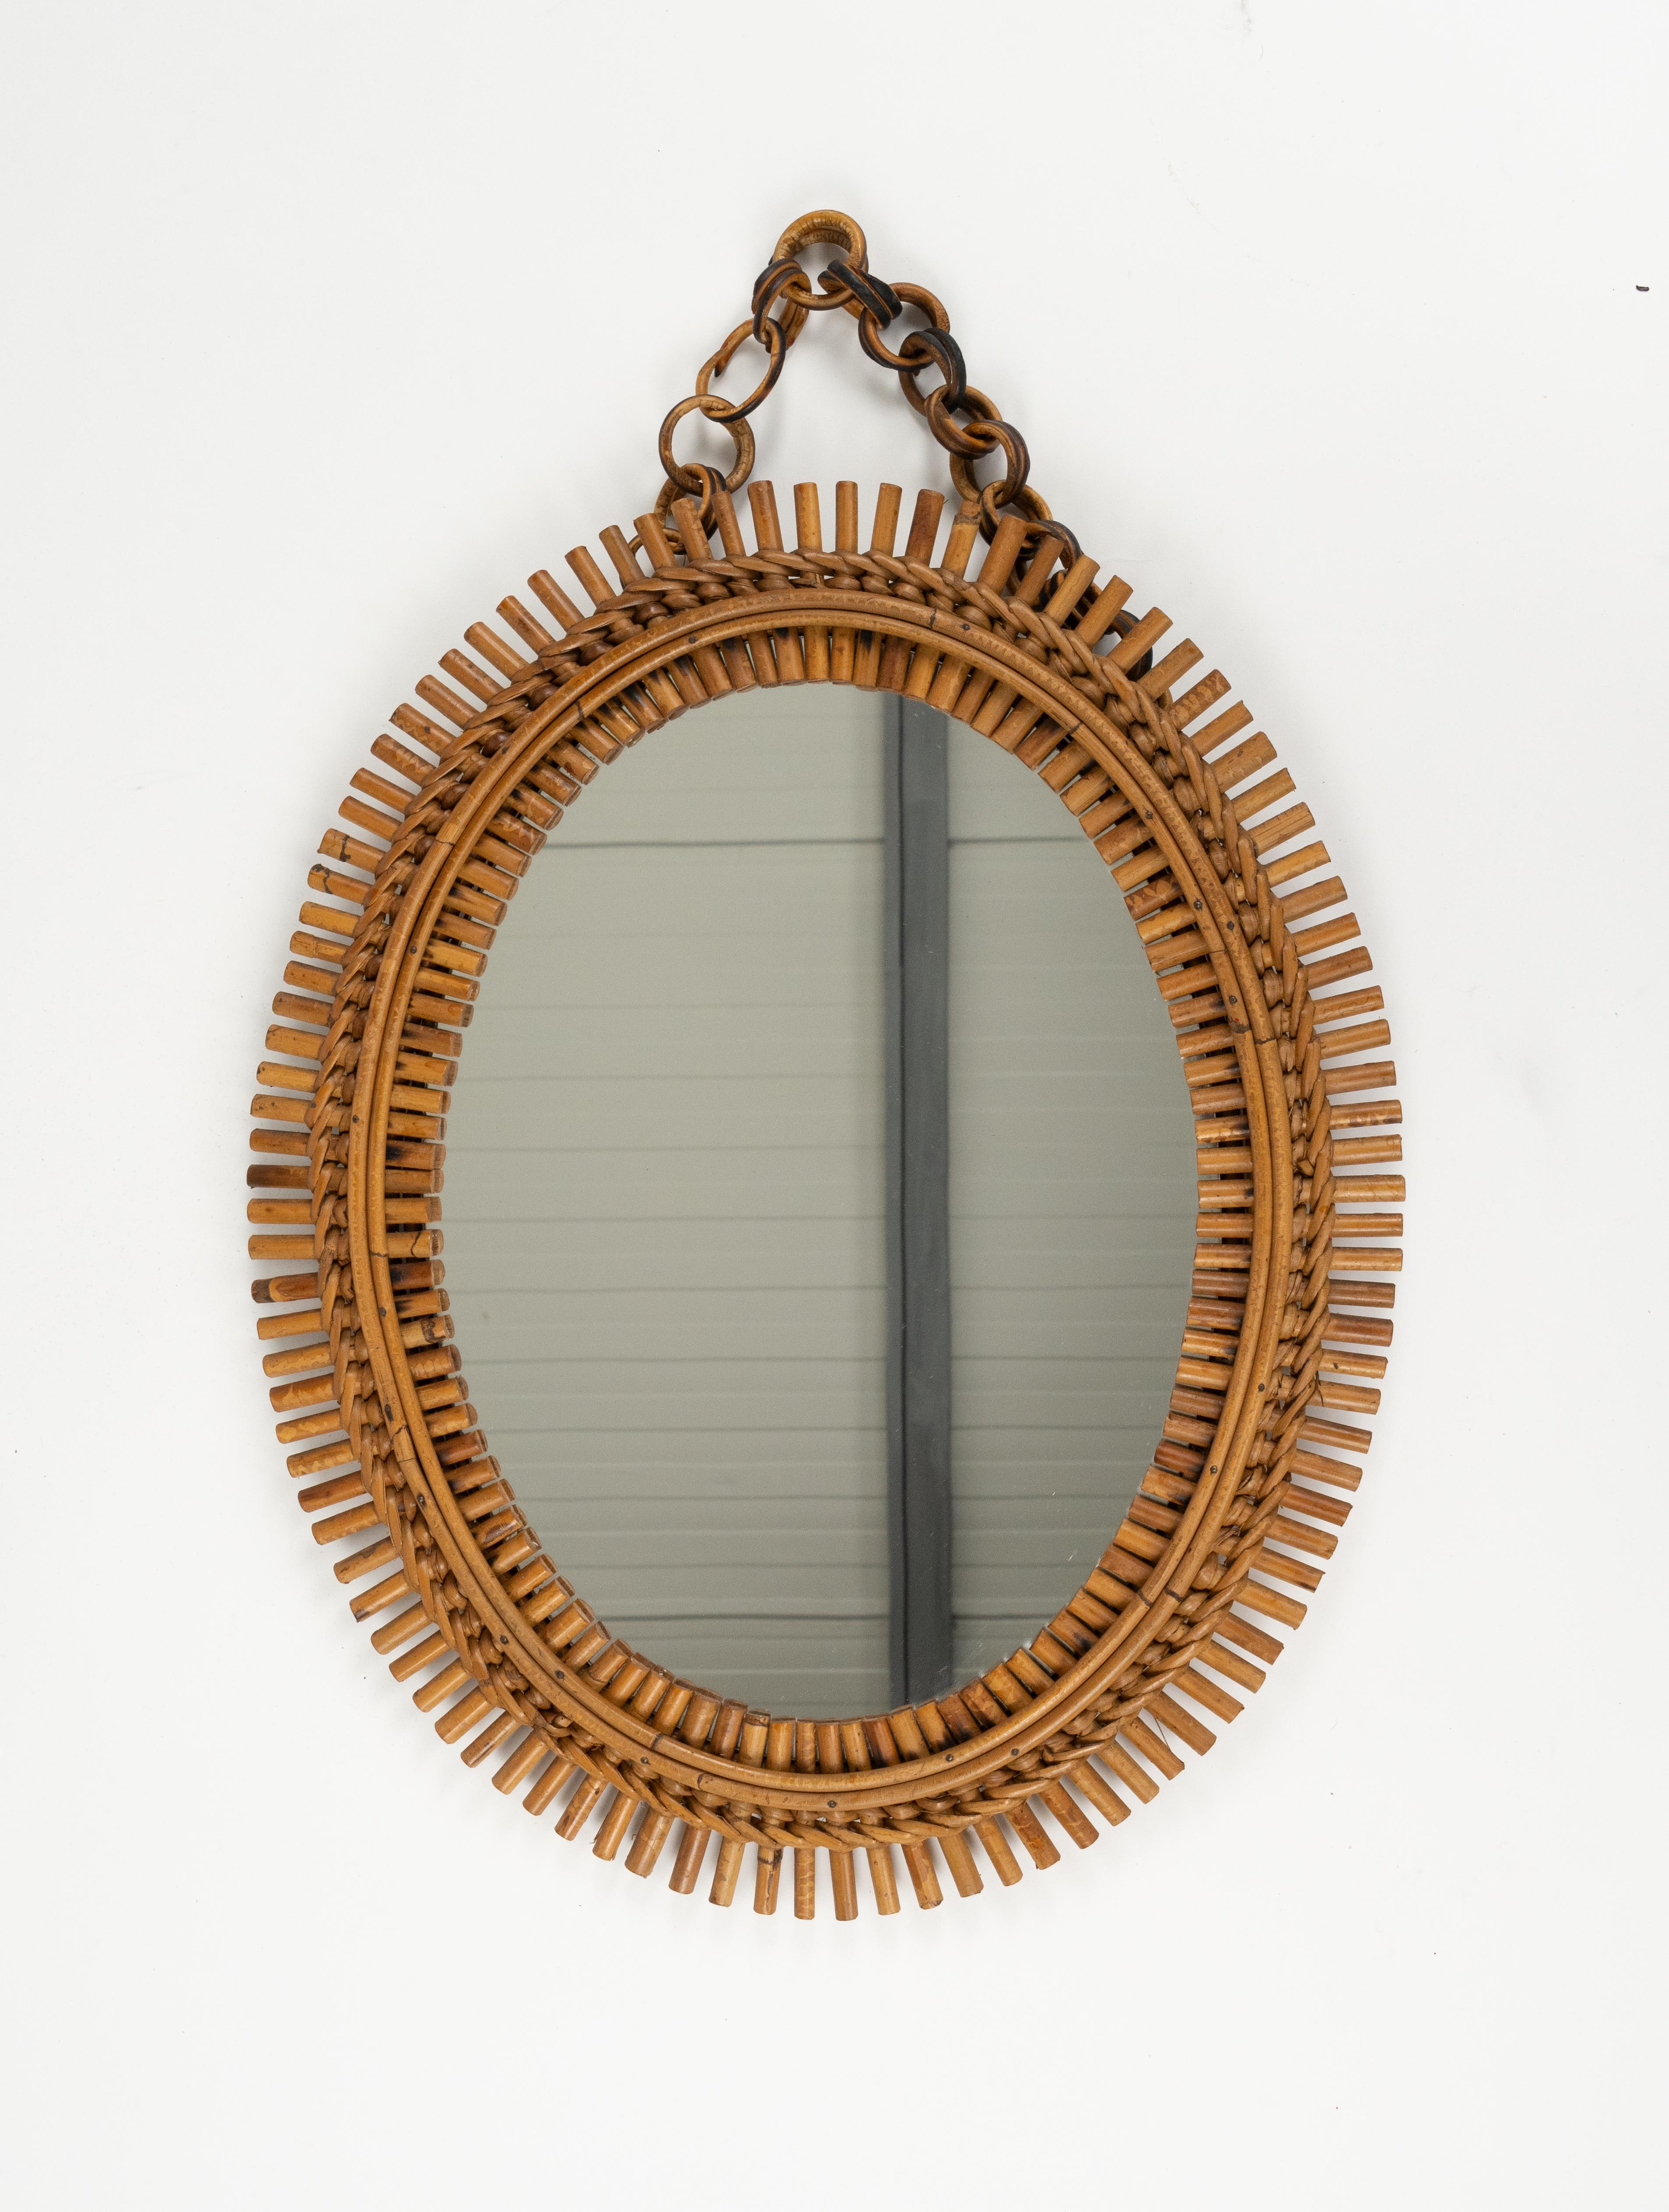 Italian Midcentury Rattan and Bamboo Oval Wall Mirror with Chain, Italy 1960s For Sale